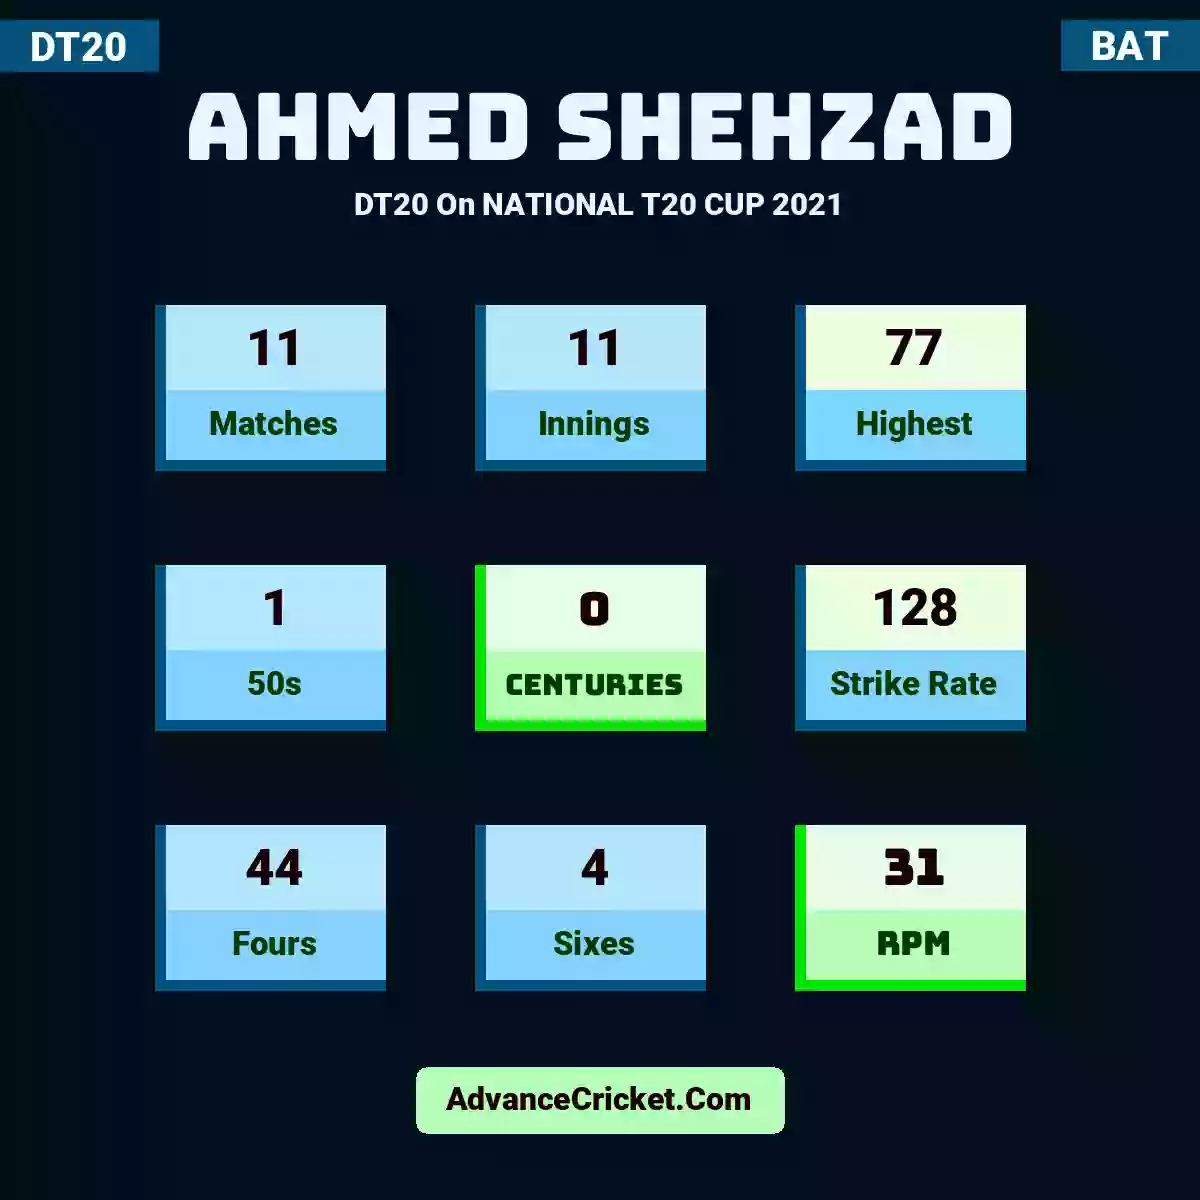 Ahmed Shehzad DT20  On NATIONAL T20 CUP 2021, Ahmed Shehzad played 11 matches, scored 77 runs as highest, 1 half-centuries, and 0 centuries, with a strike rate of 128. A.Shehzad hit 44 fours and 4 sixes, with an RPM of 31.